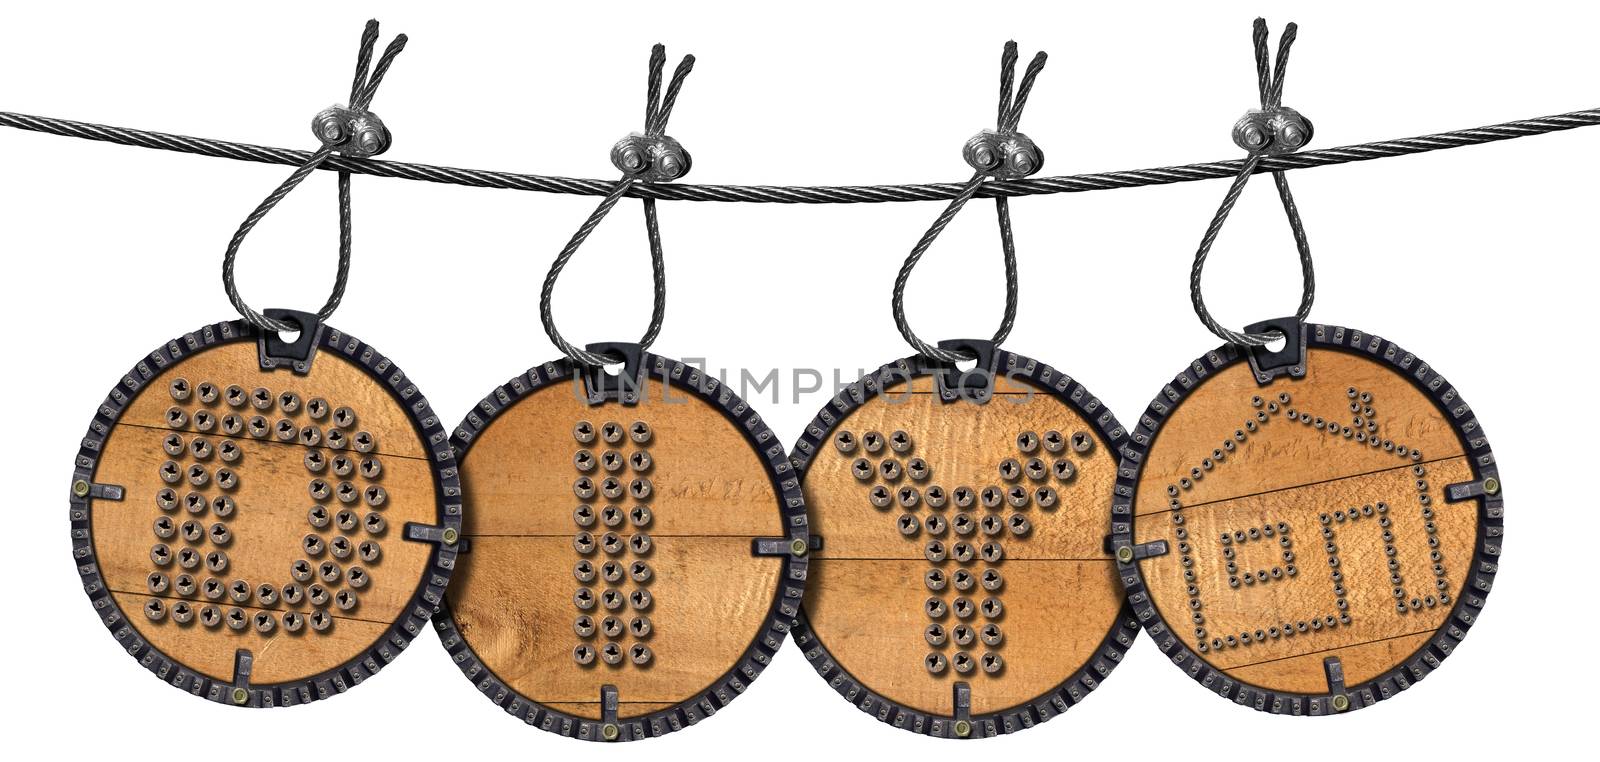 Metallic and wooden labels hanging on steel cable with text Diy and symbol of a house. Isolated on white background